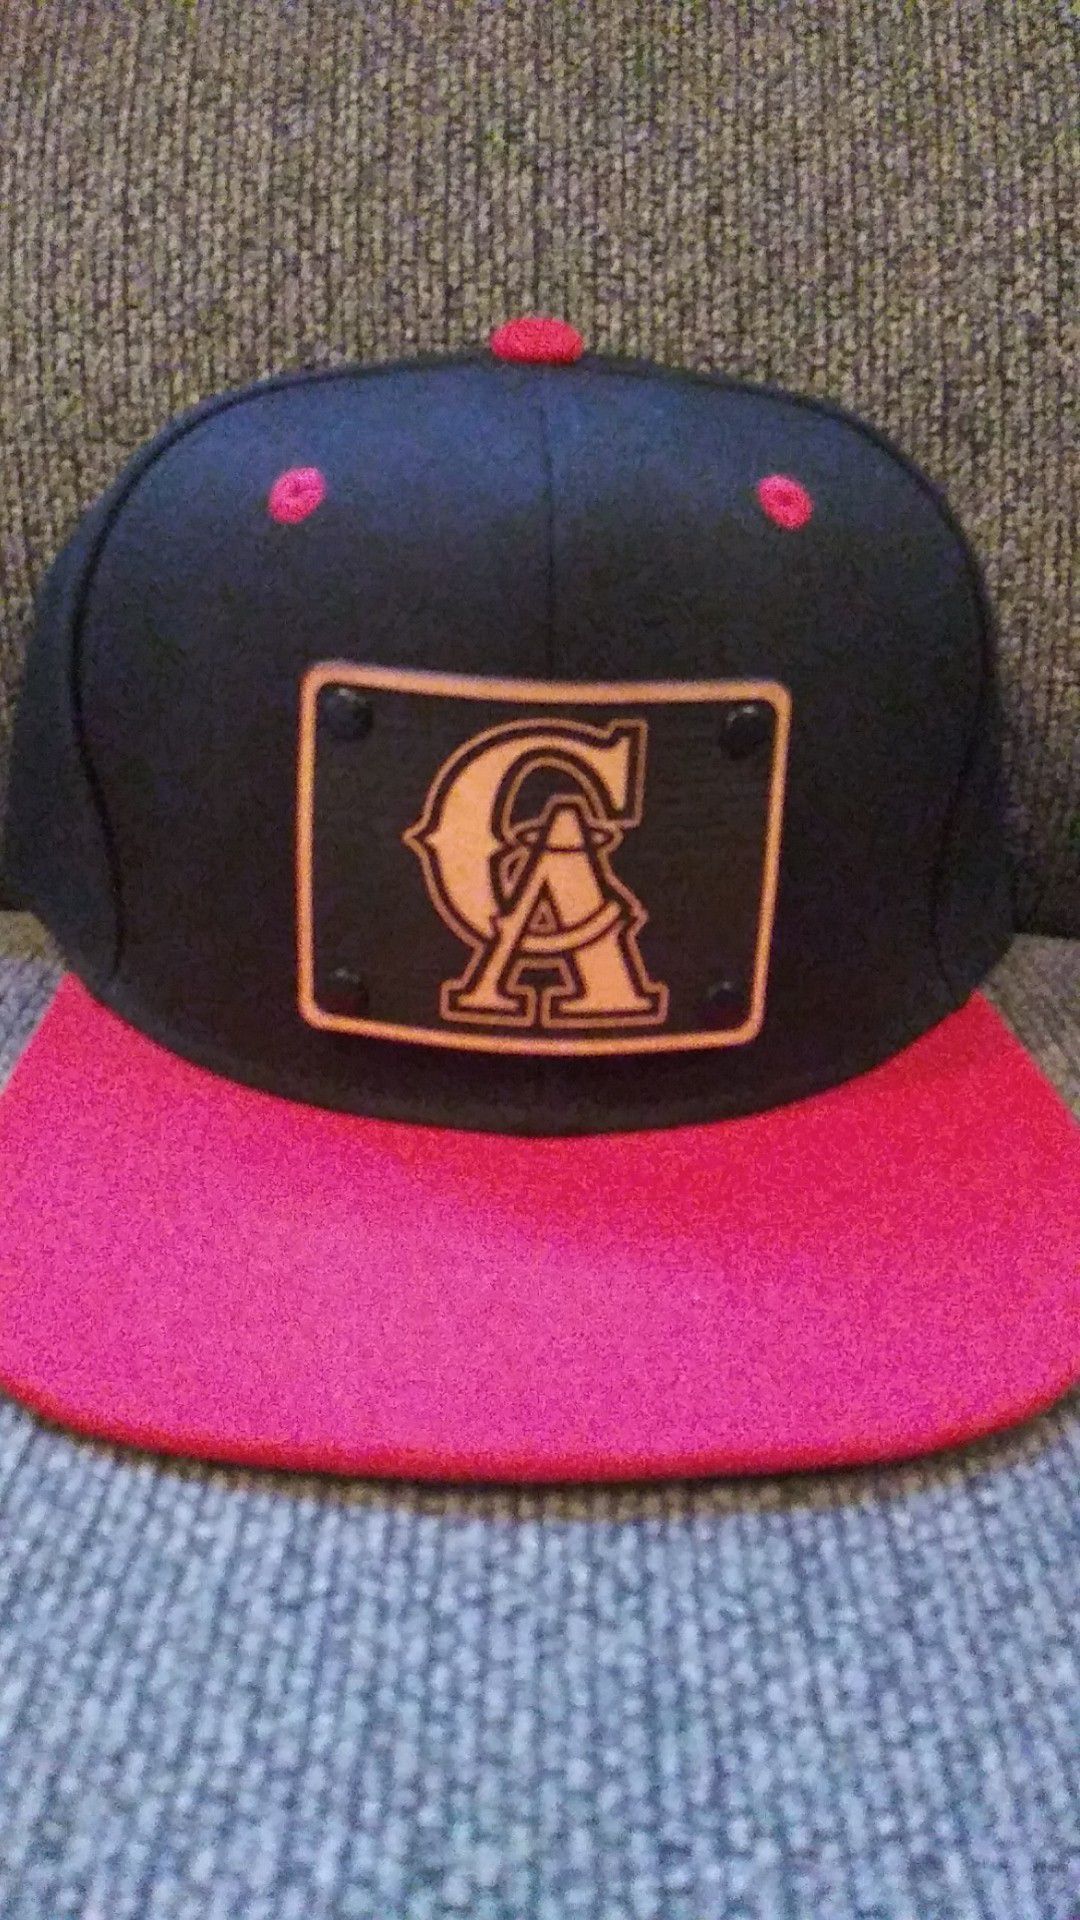 California Angels hat with Leather Badge